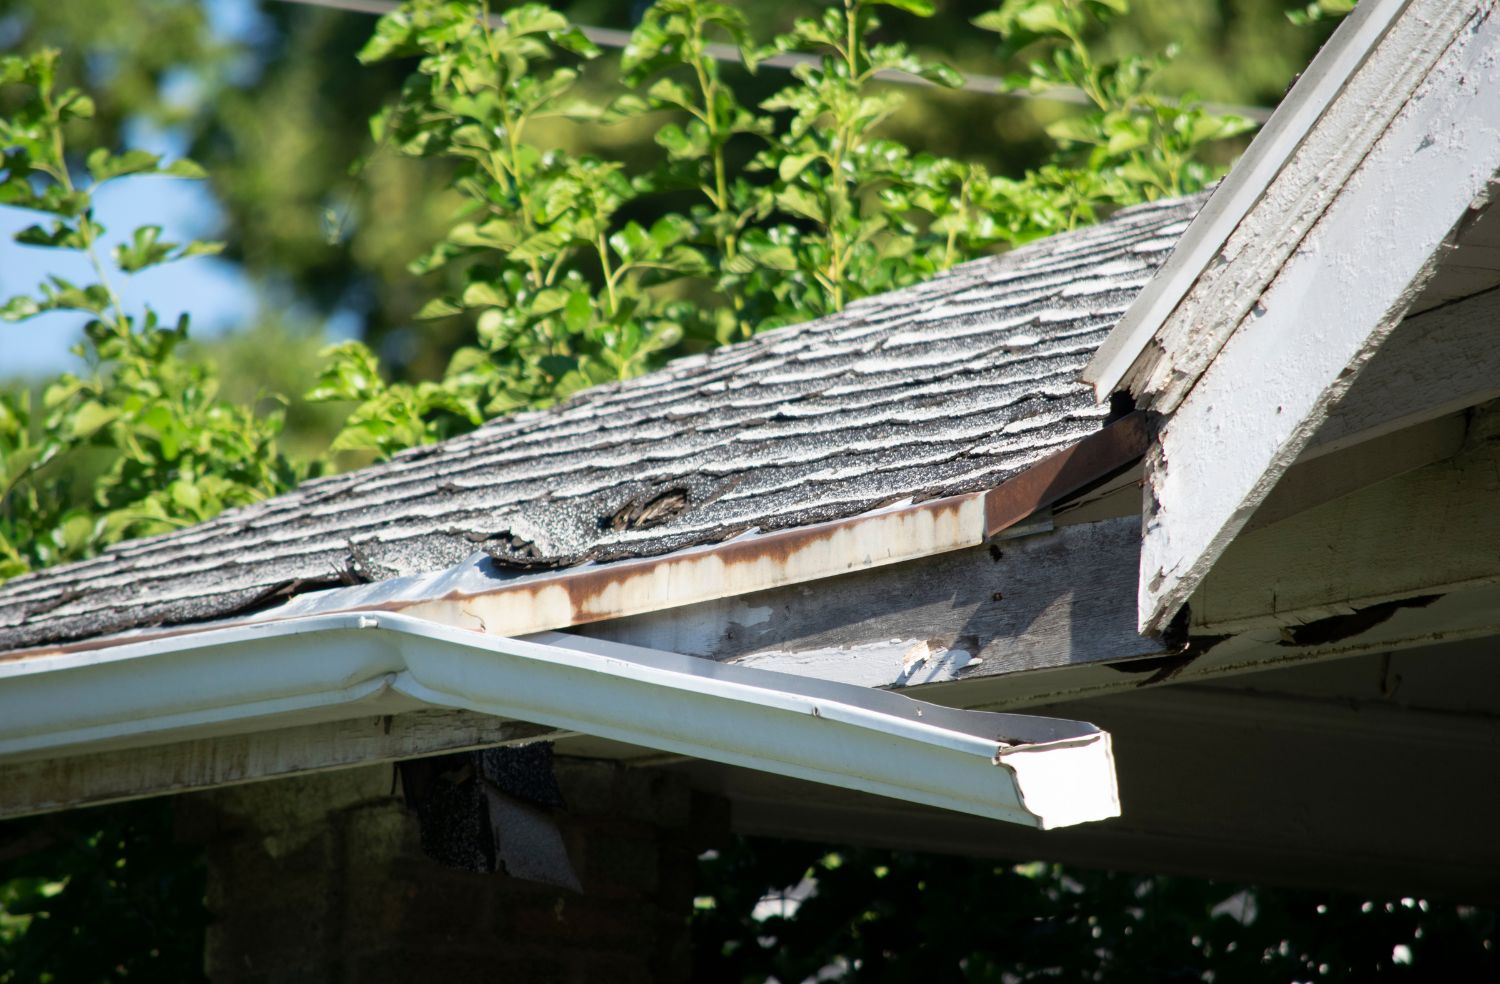 If any gutter damage is discovered, rest assured that we have the solutions